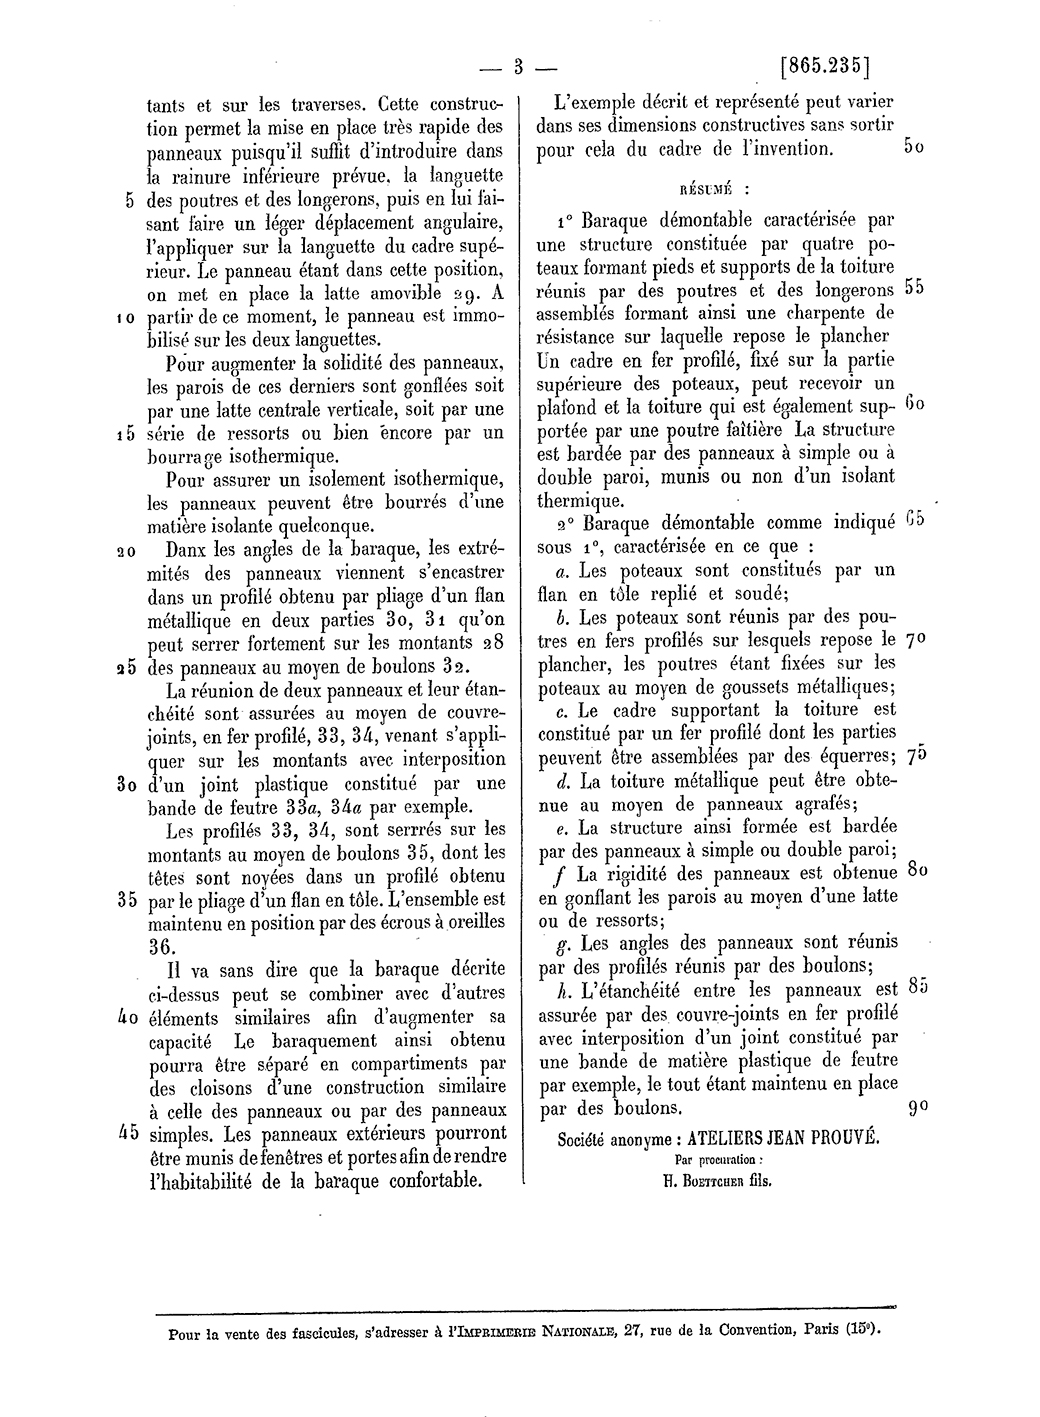 Ateliers Jean Prouvé. “Demountable Shelter”: patent no. 865.235 filed 16 January 1940 with the Ministry of Industry and Labor’s industrial property department at Versailles, granted 17 February 1941, published 16 May 1941.